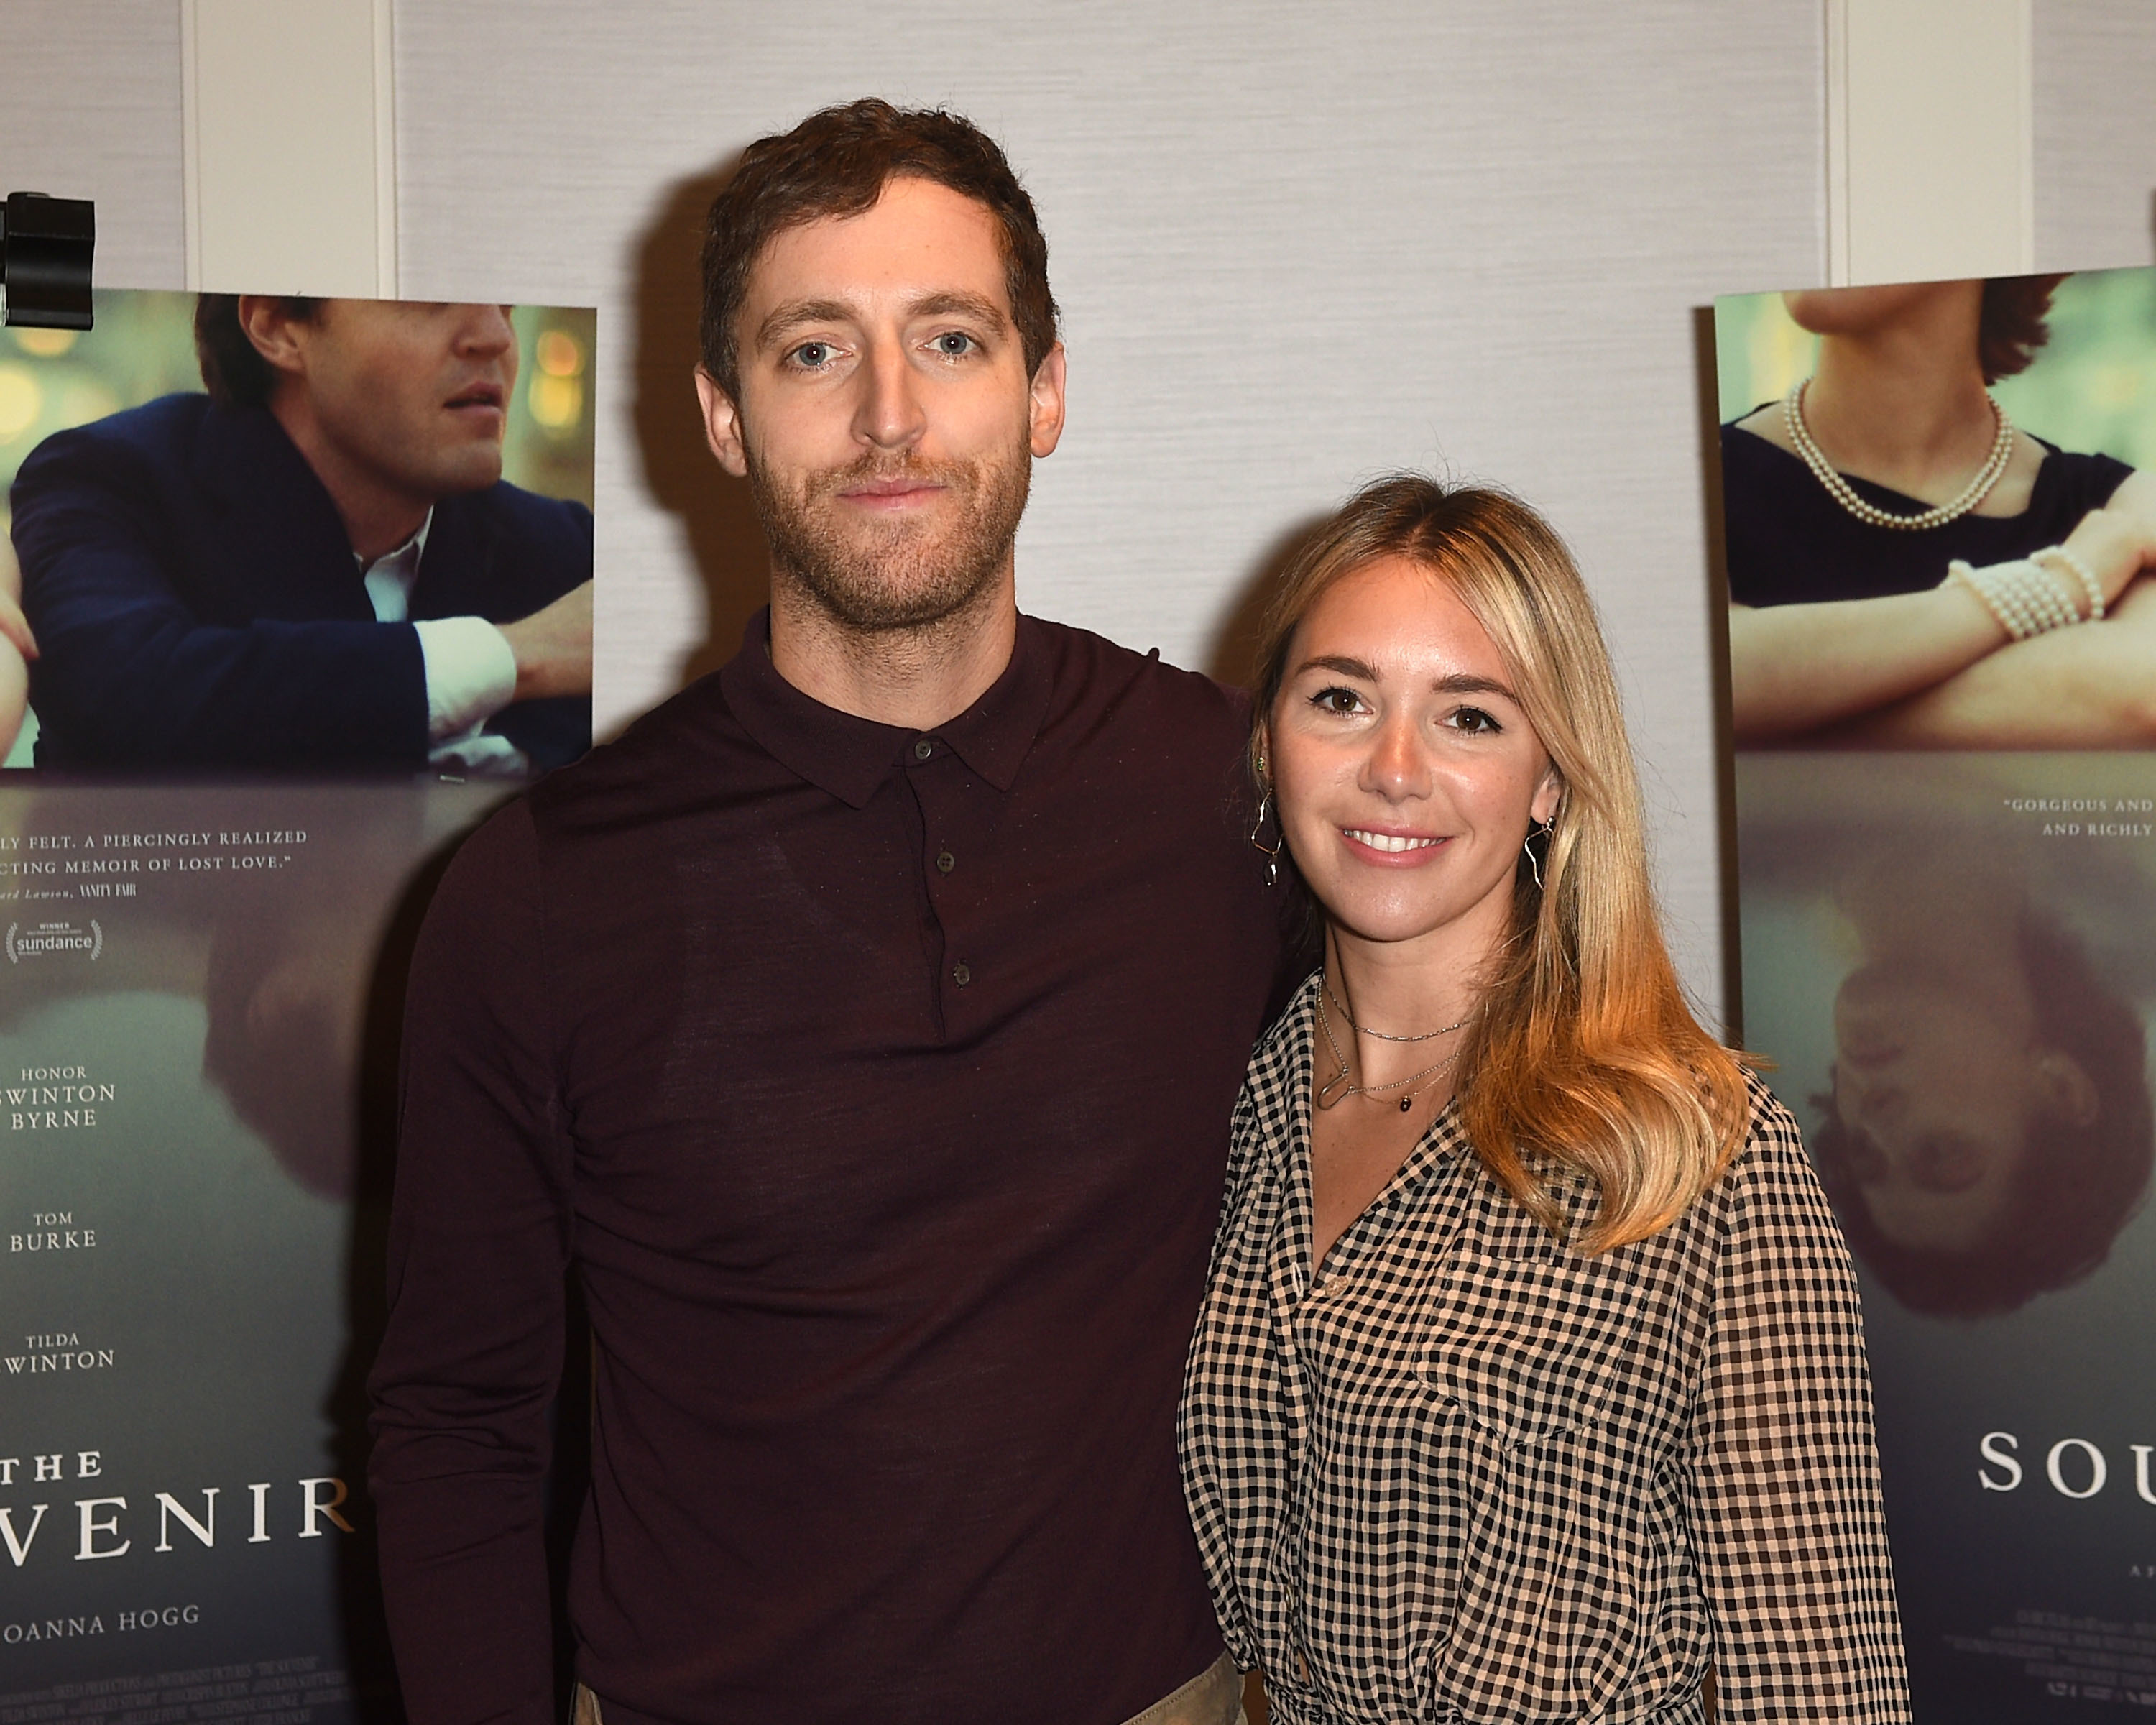 Silicon Valleys Thomas Middleditch says he and wife are swingers Wonderwall photo